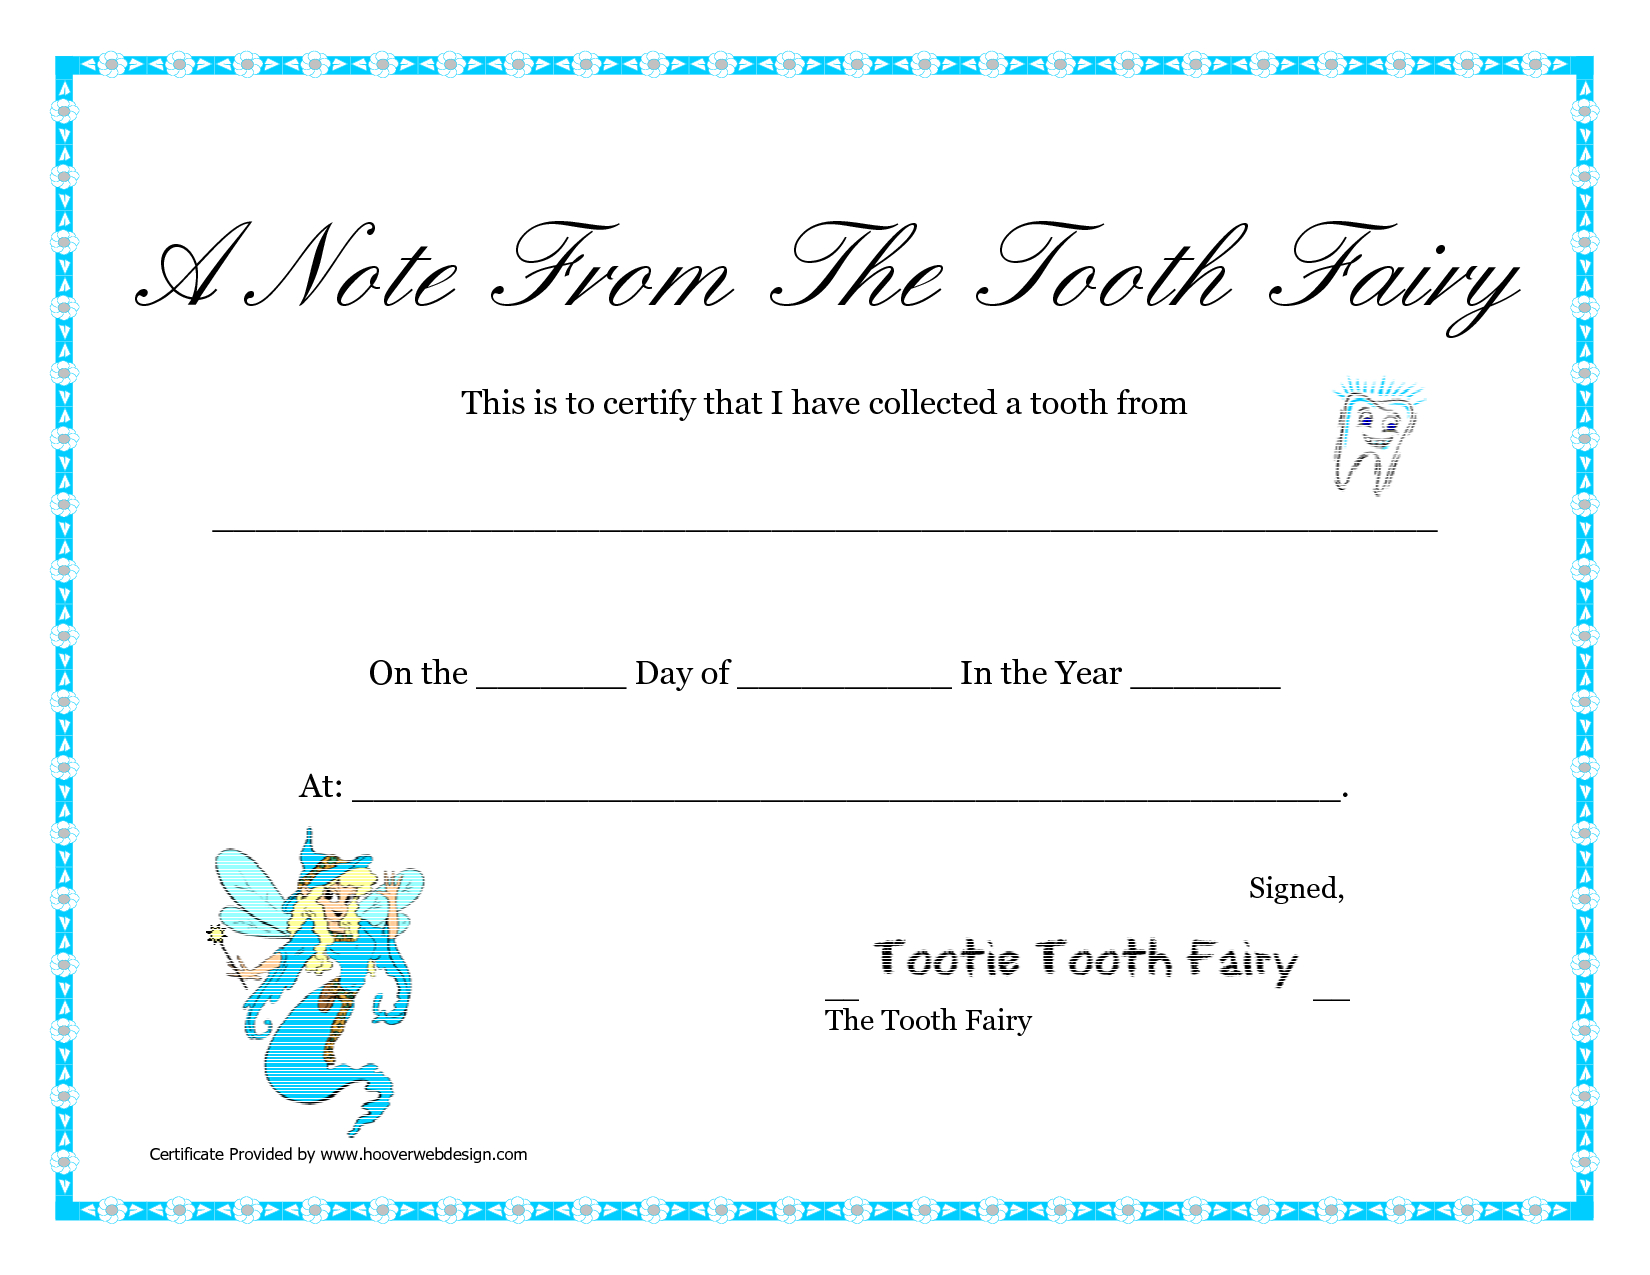 Free Printable Tooth Fairy Letter | Tooth Fairy Certificate - Free Printable Tooth Fairy Certificate